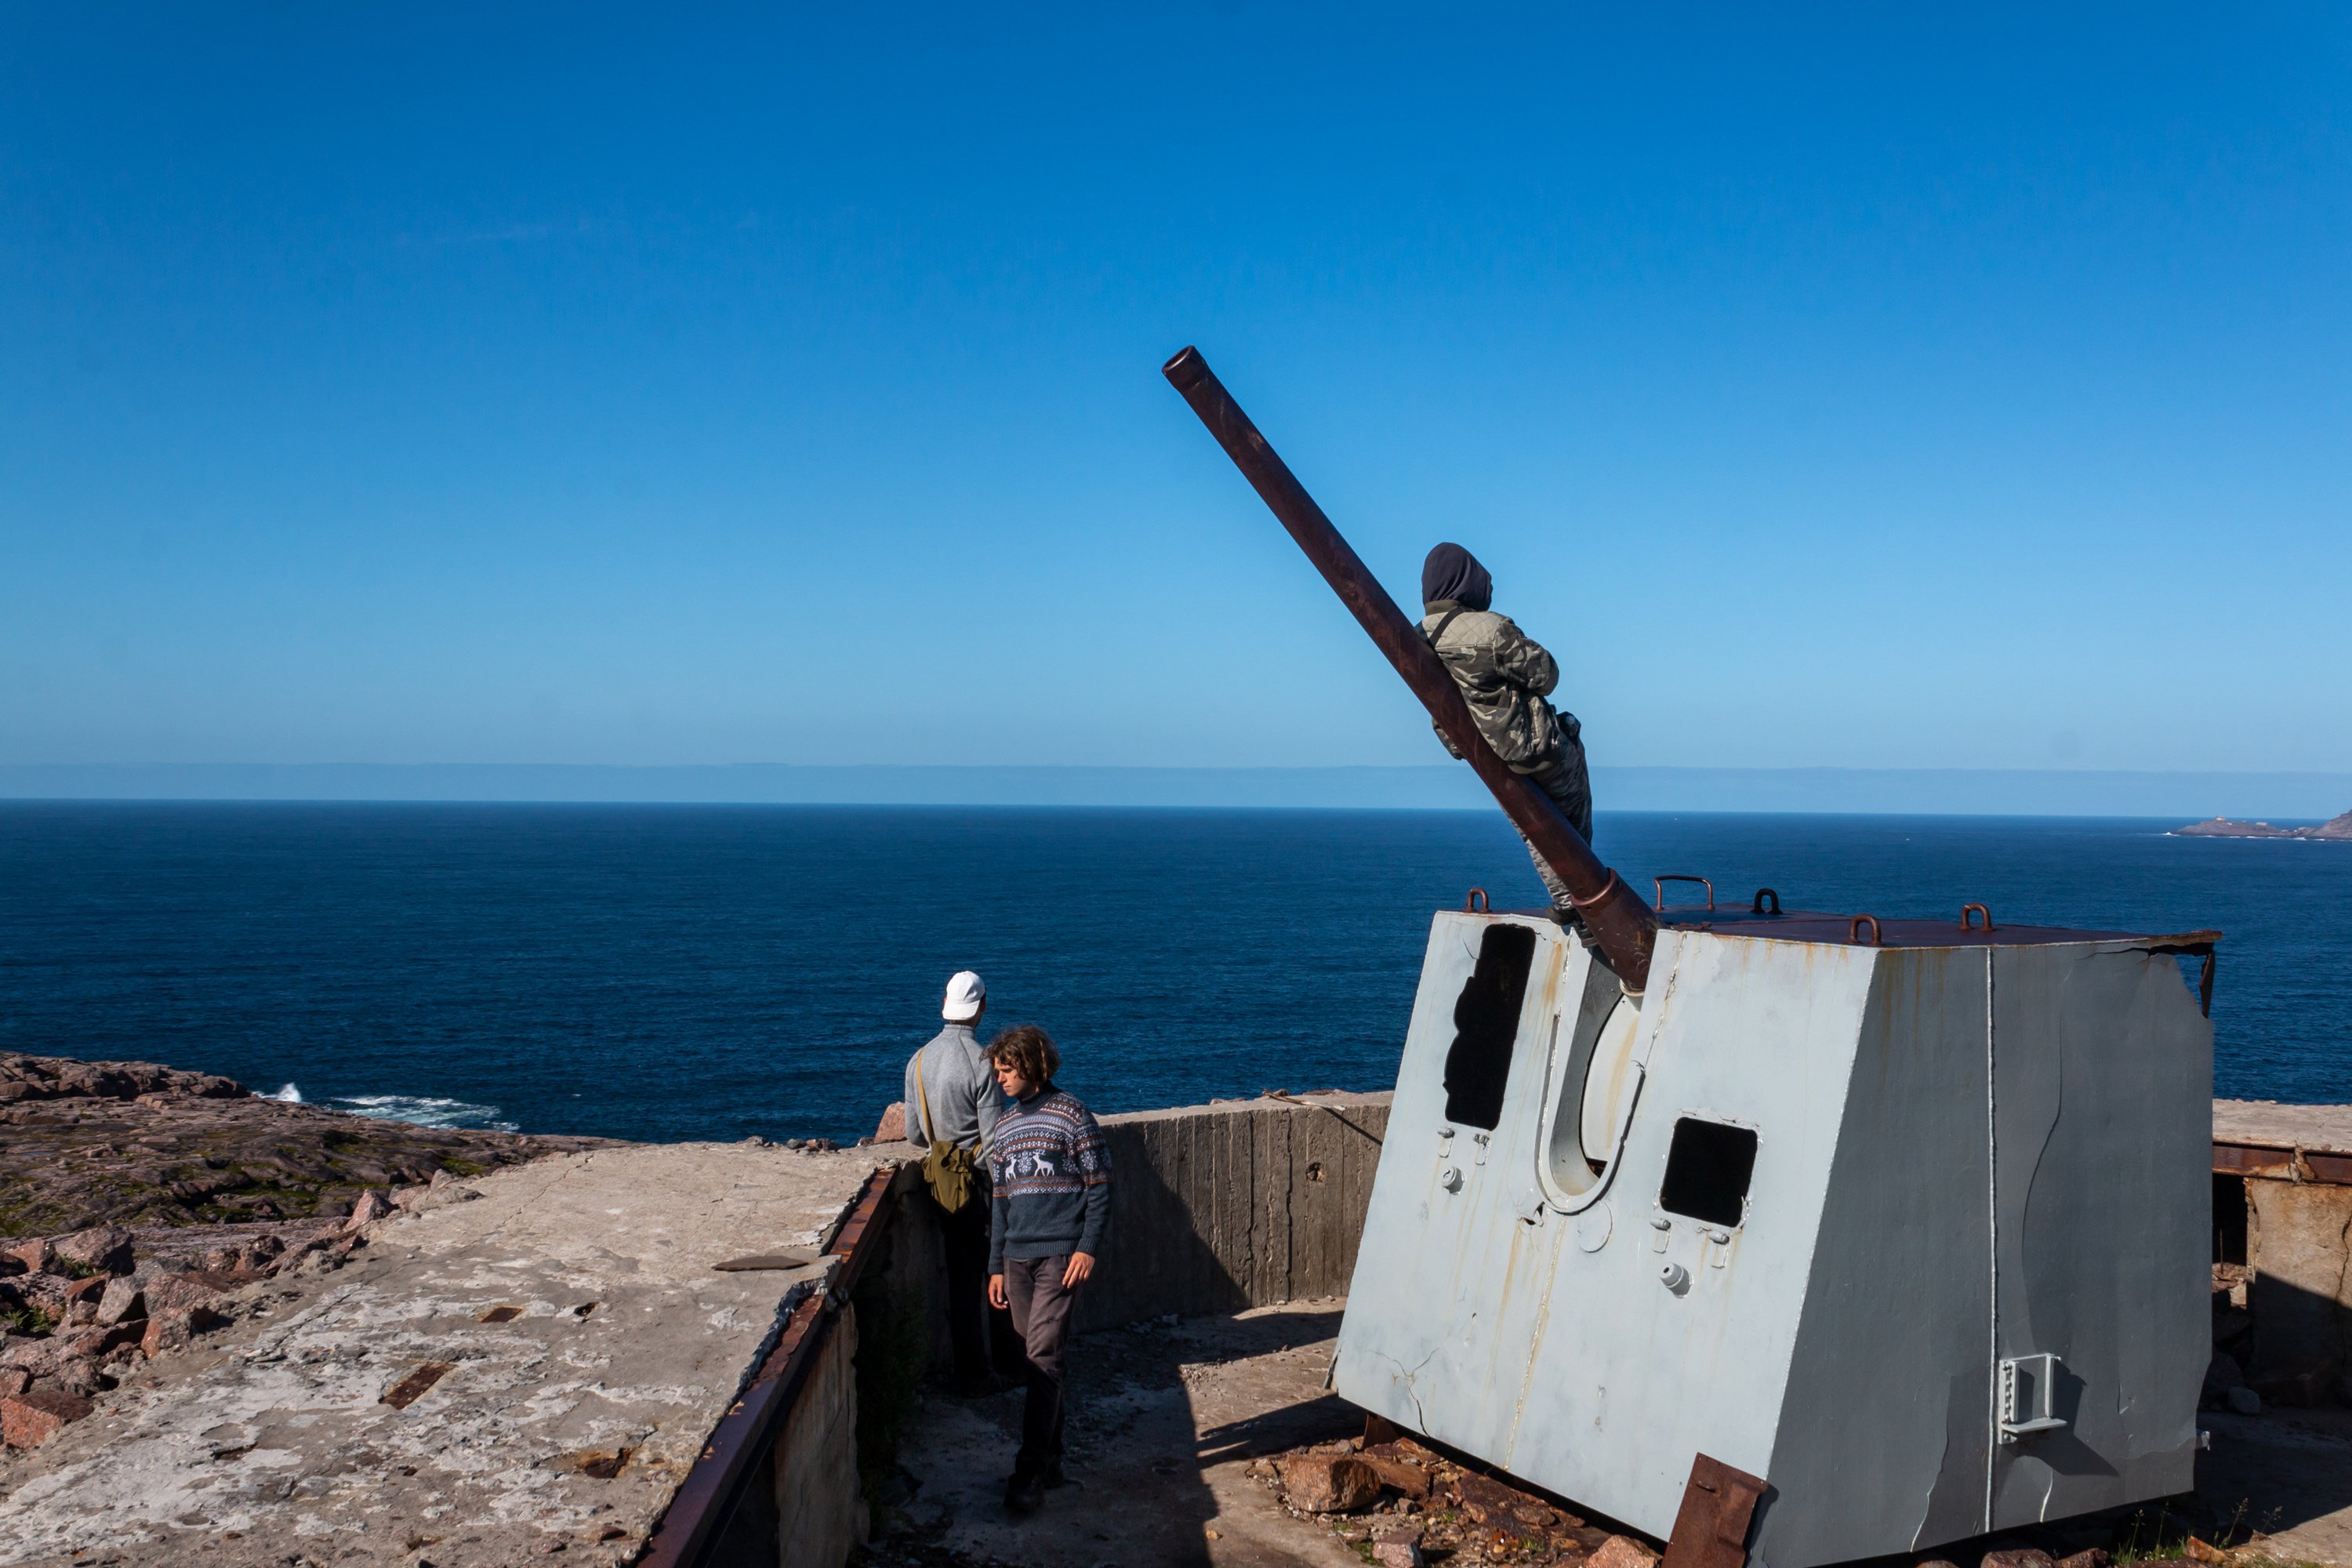 Roma and Danya staring at the Barents Sea from the WWII artillery positions.